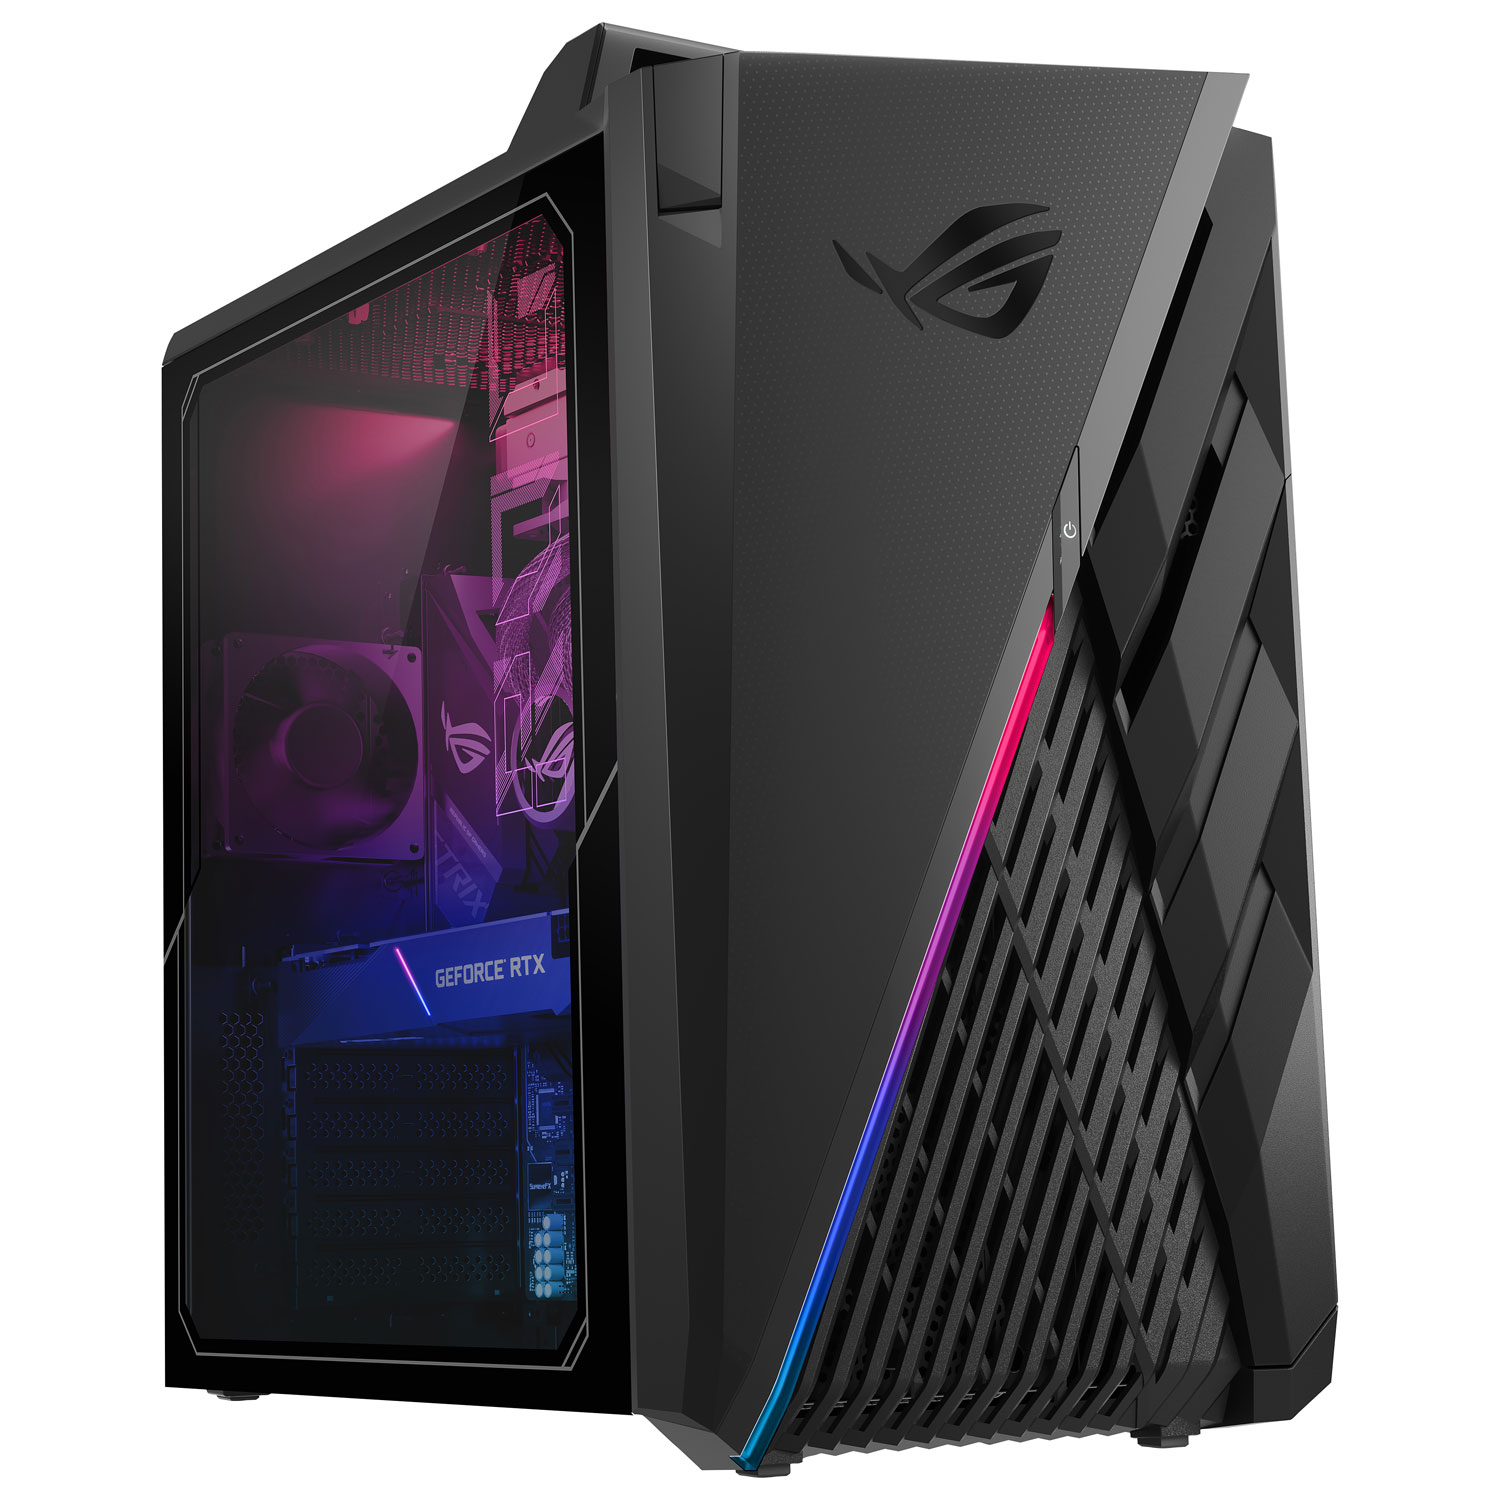 ASUS ROG Strix G35CG Gaming PC (Intel Core i7-11700KF/1TB SSD/16GB RAM/RTX 3070) - Only at Best Buy